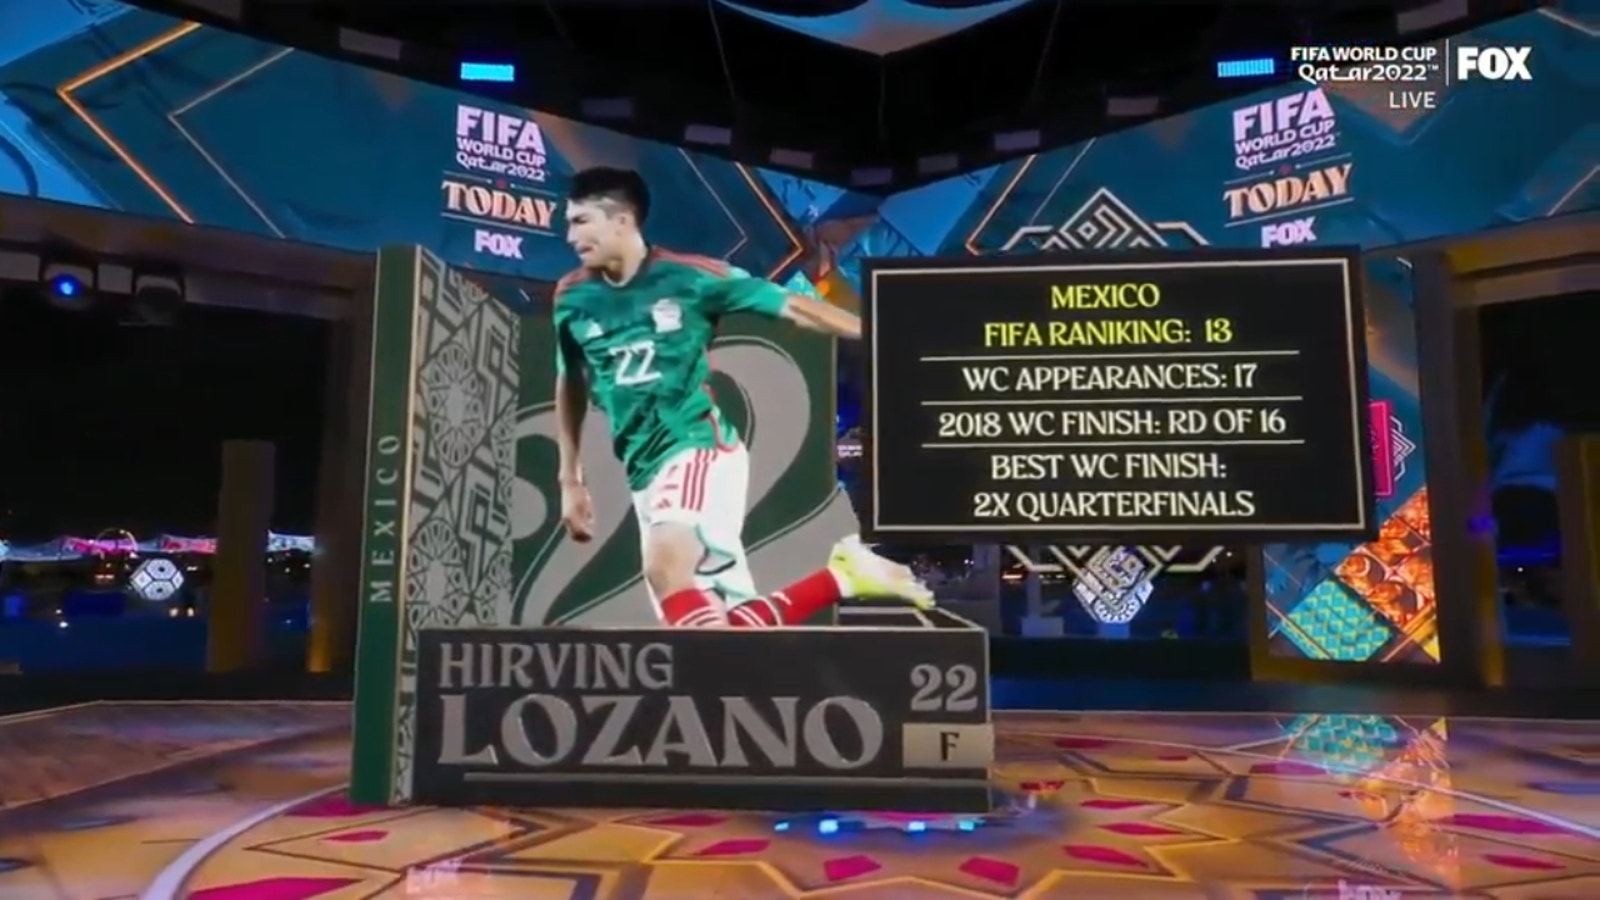 Mexico's strengths